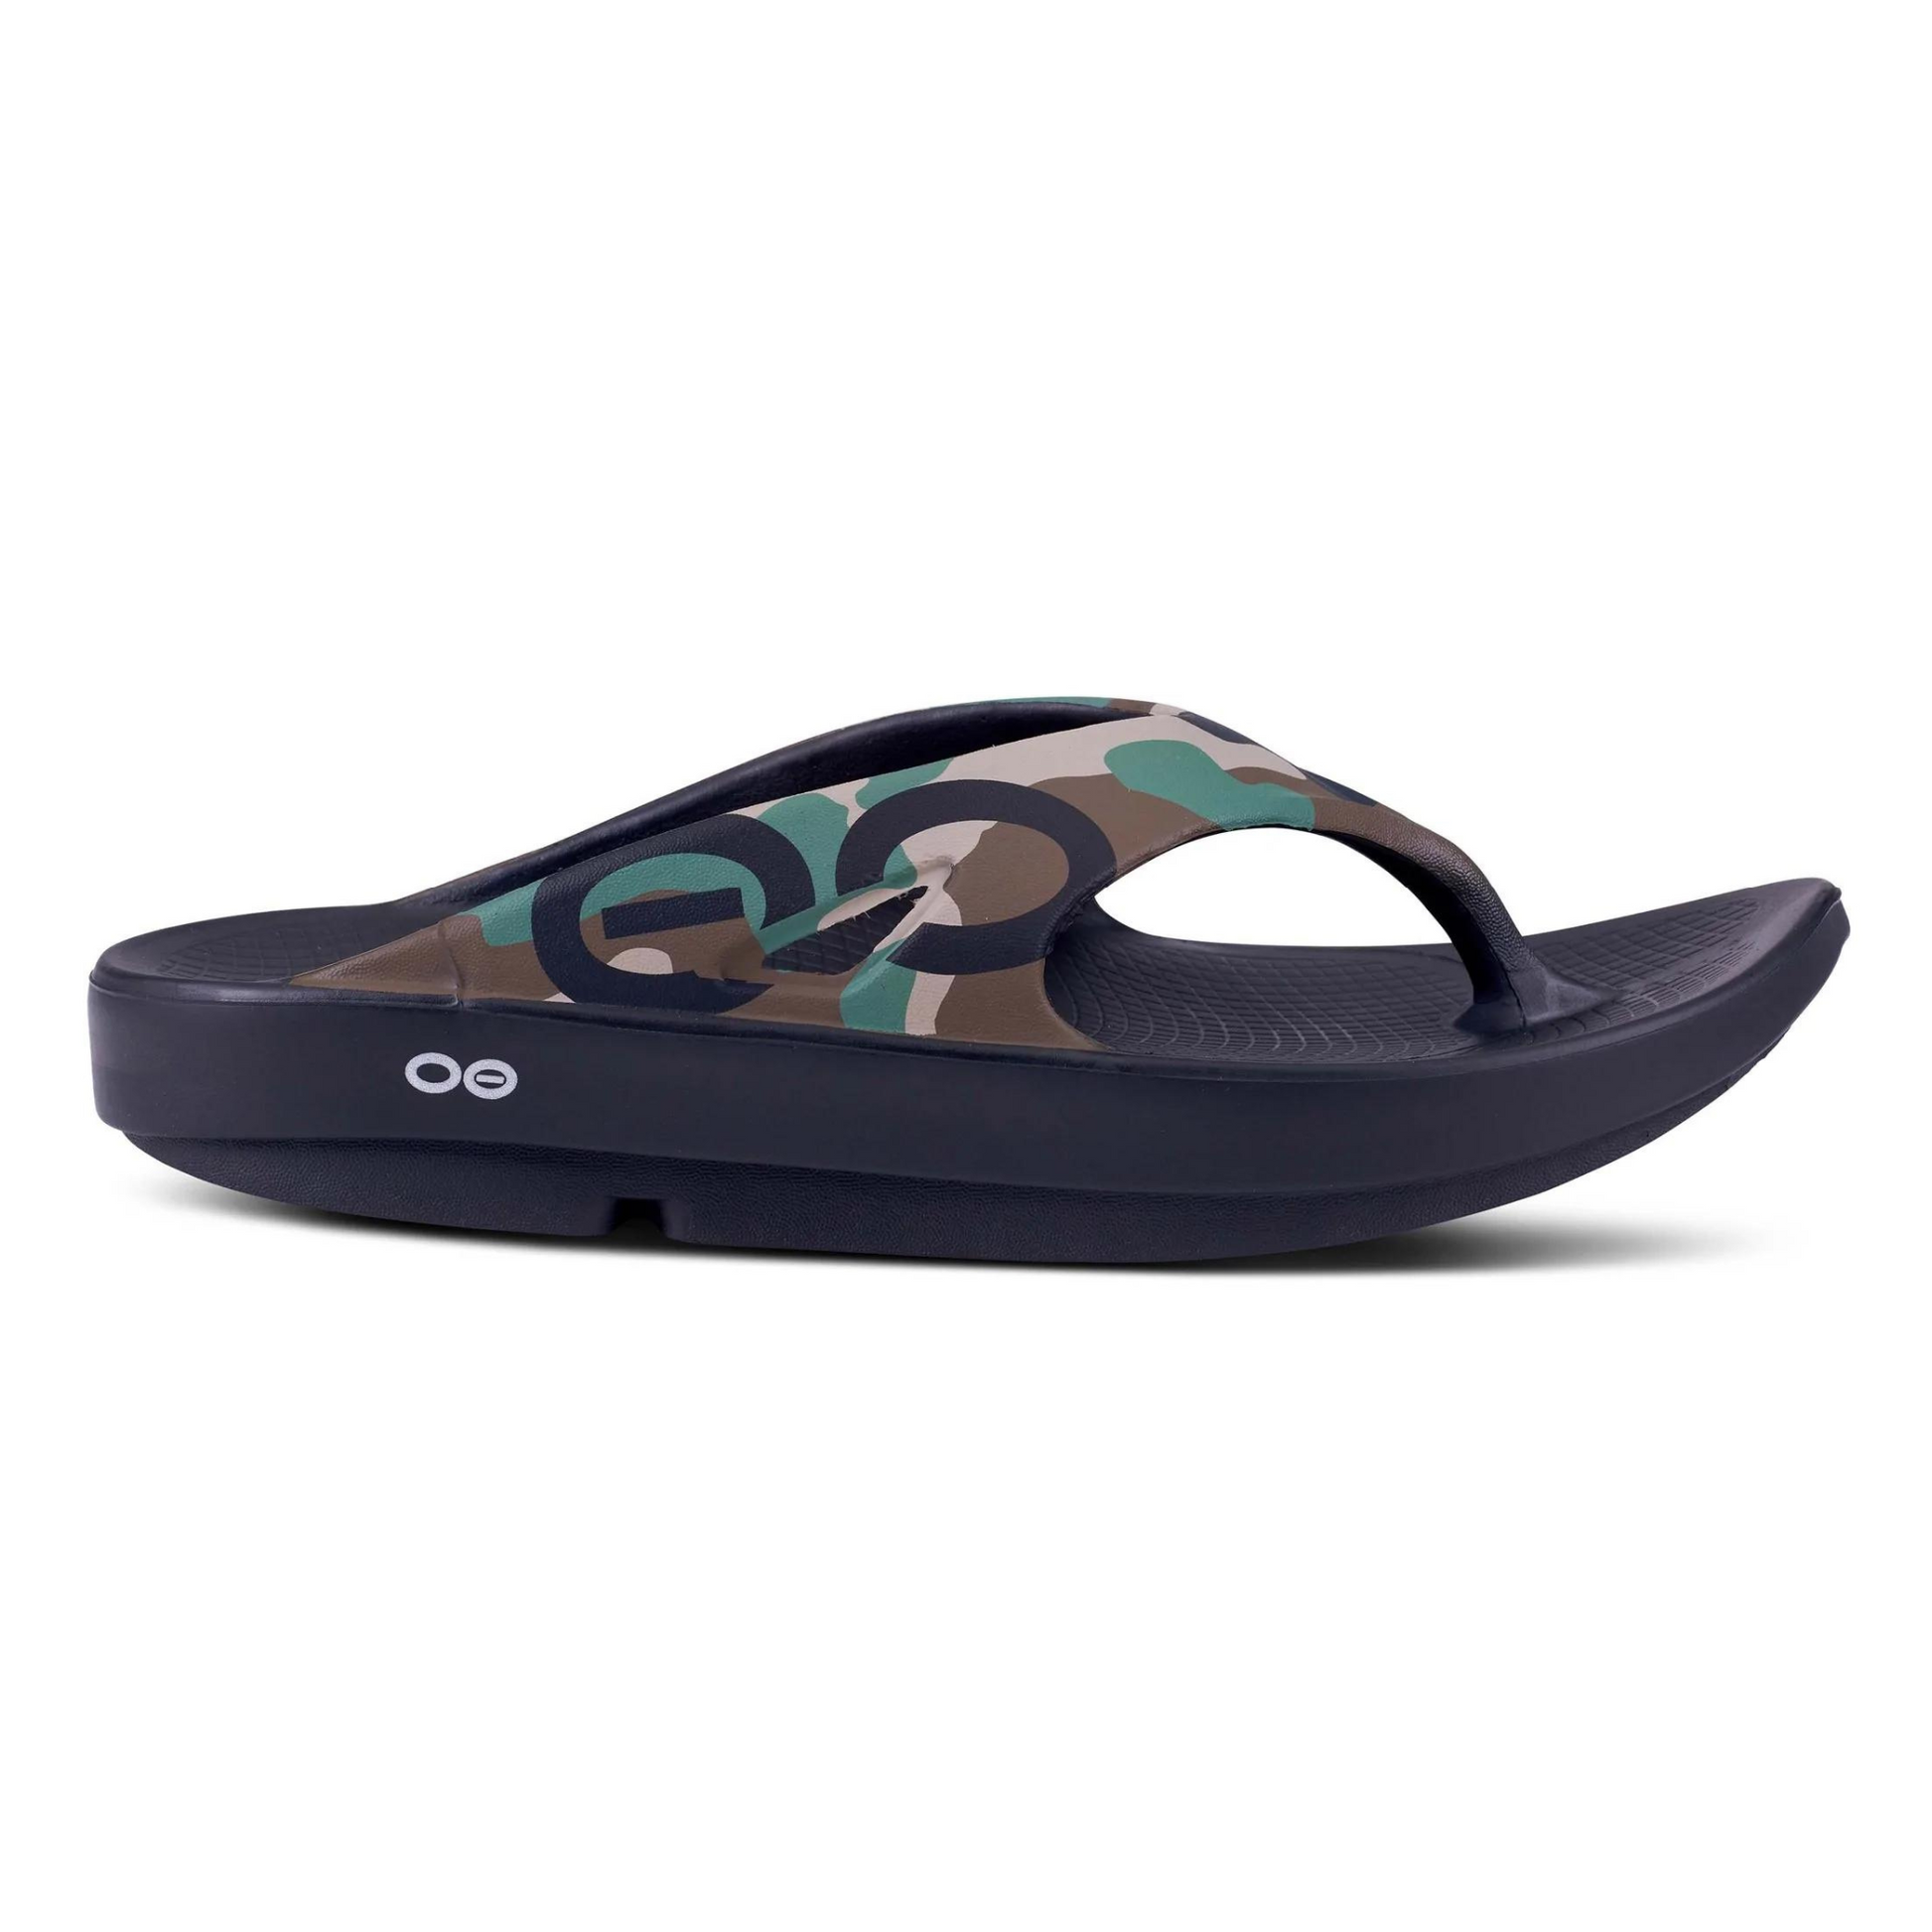 Black soled flip-flop with thick arched toe and camo-print upper pictured in profile. 